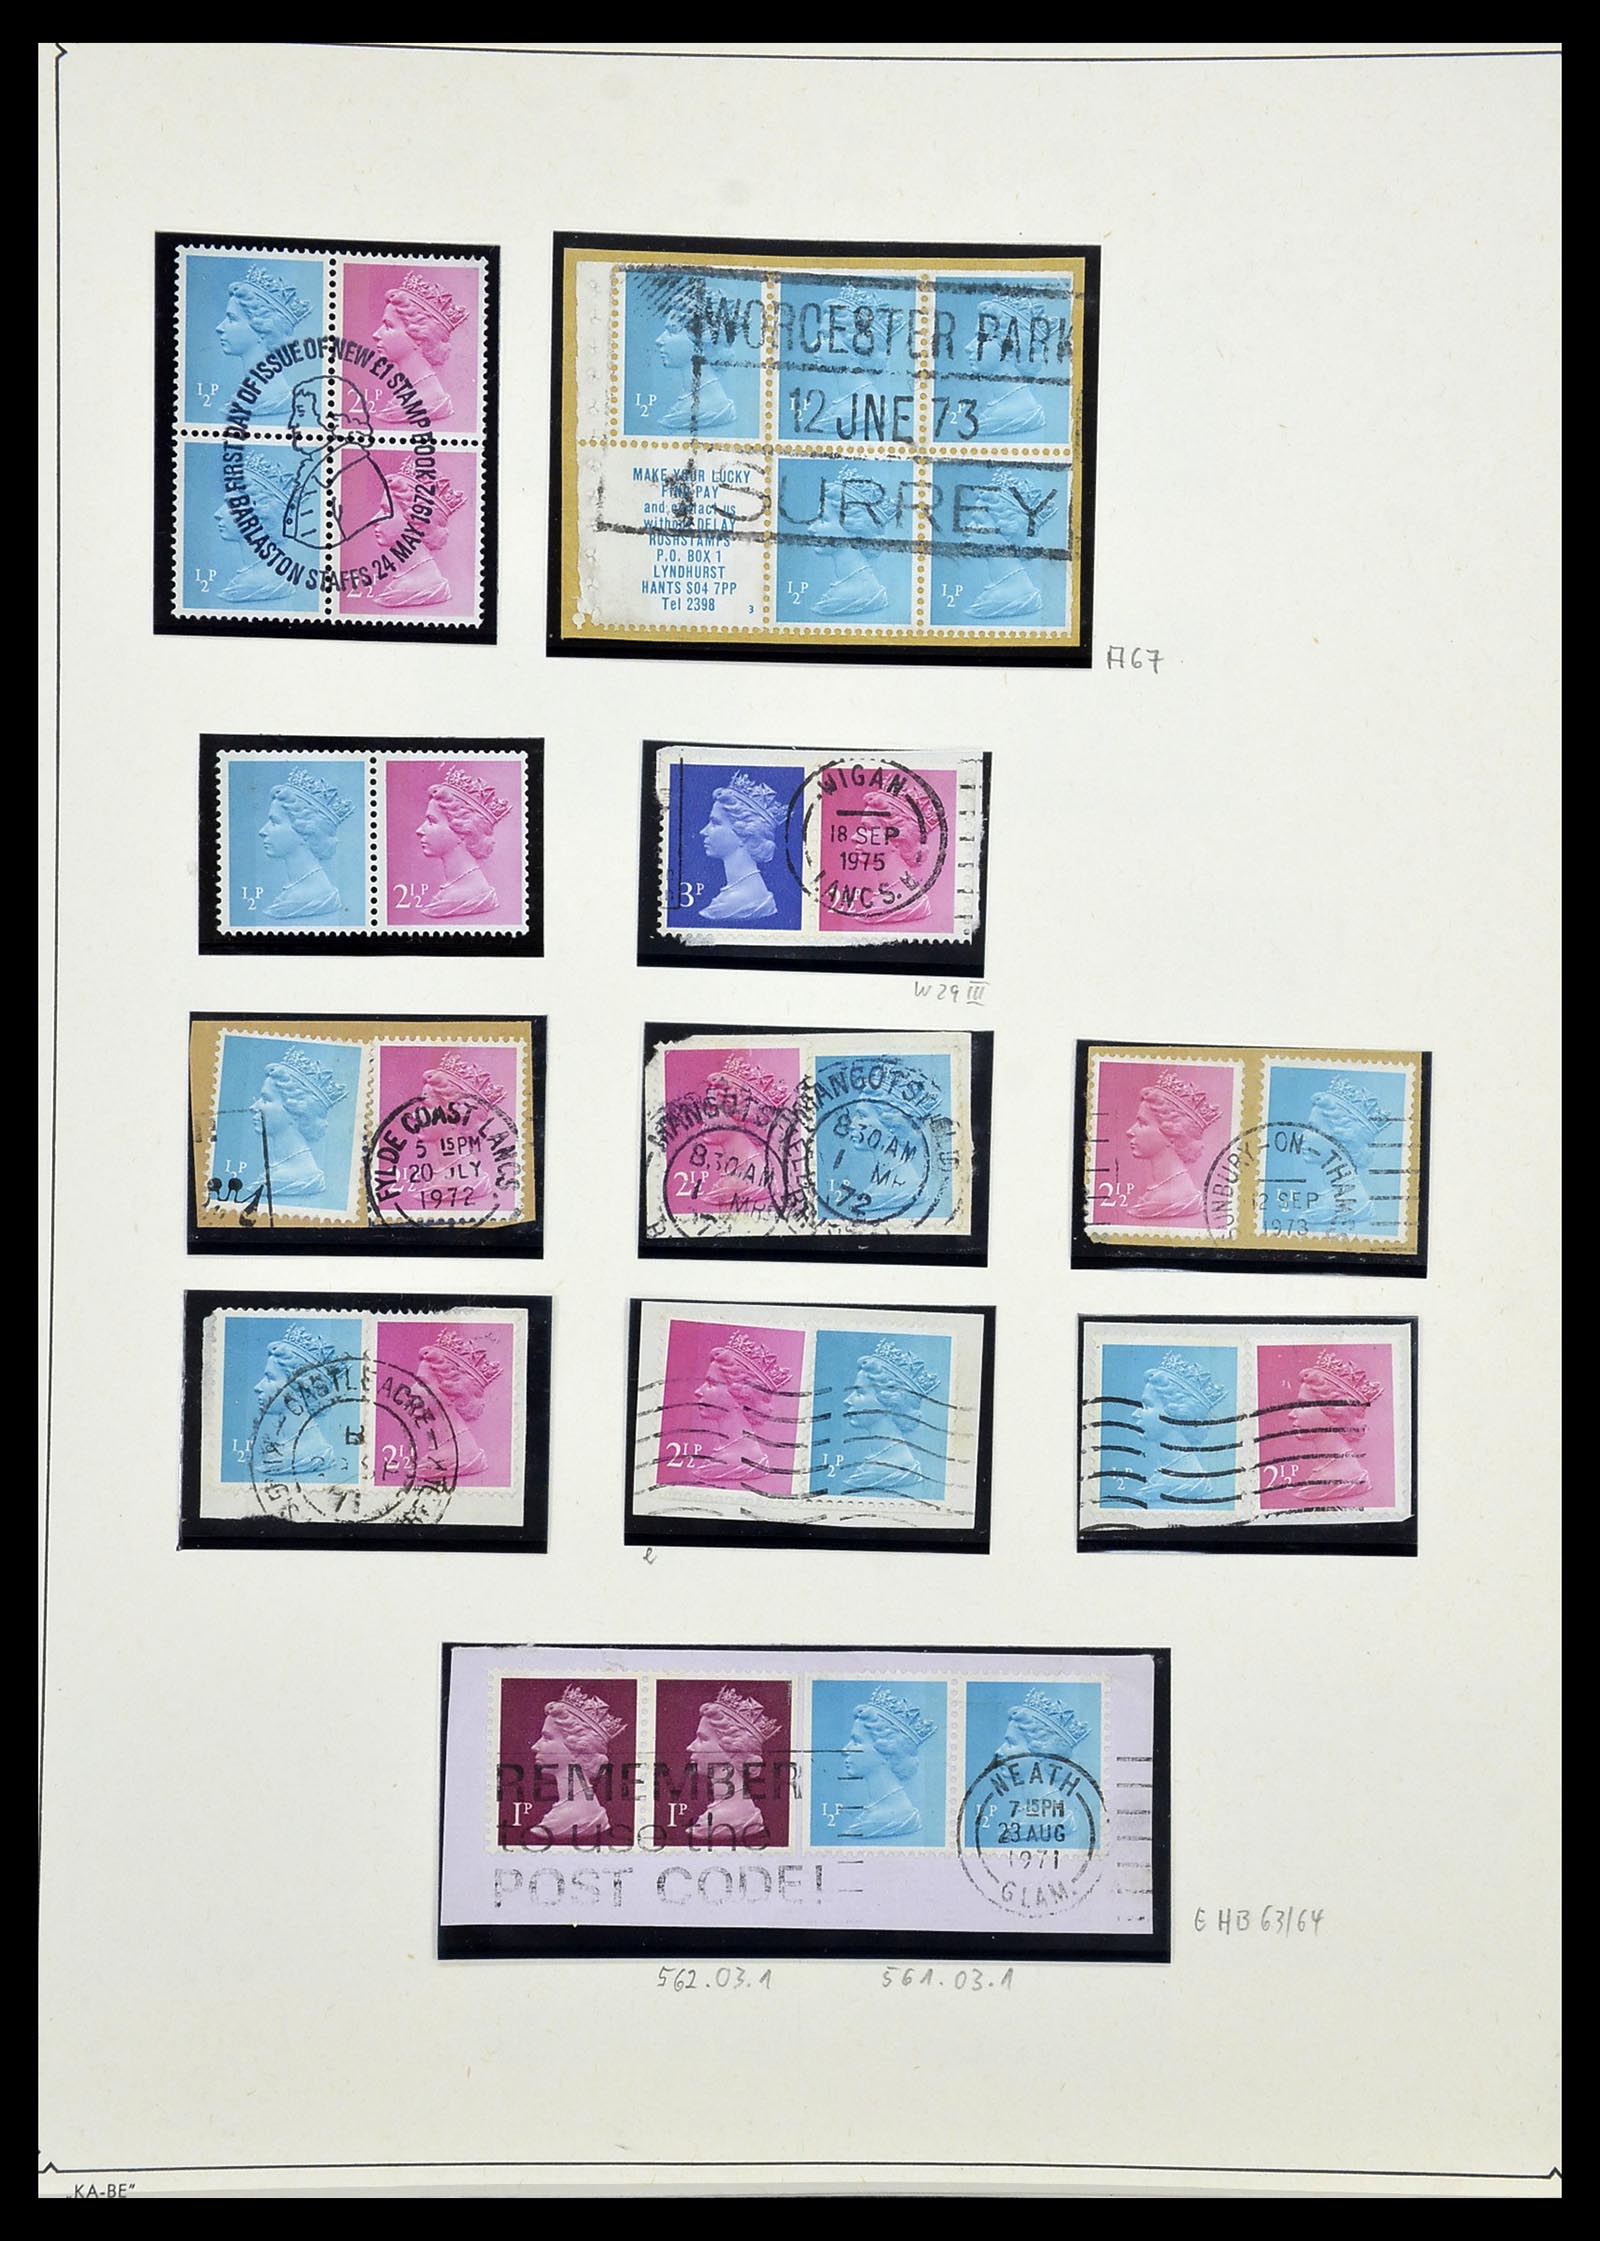 34221 190 - Stamp collection 34221 Great Britain Machins/castles 1971-2005.